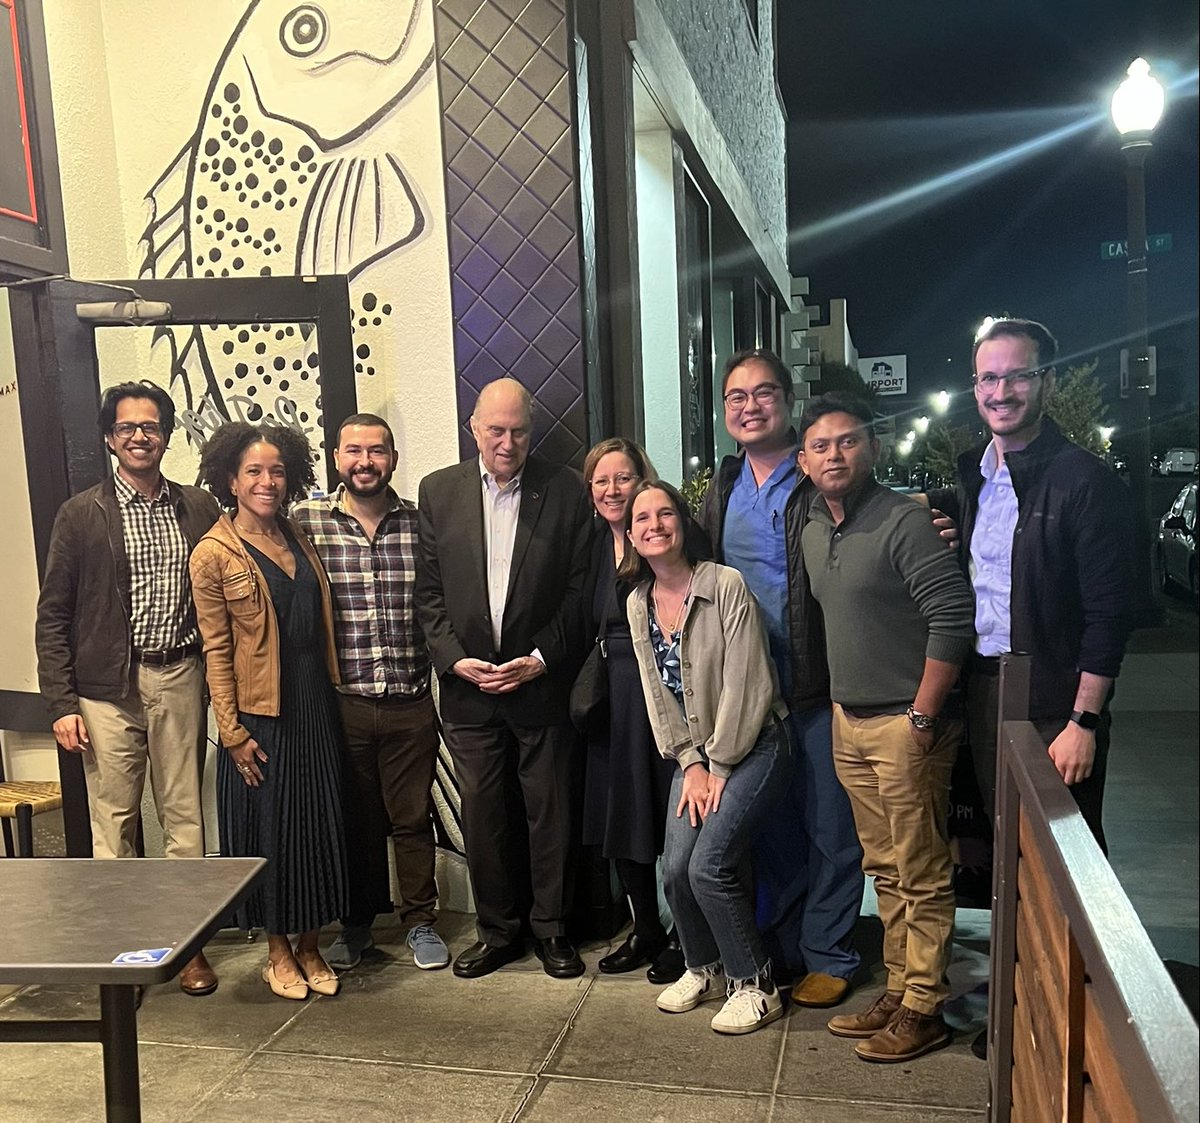 From GI Grand Rounds, to teaching patient-centered communication to dining with fellows ⁦@DDrossman⁩ time as a visiting professor was a great success!

#Gastro #Gastropsych #Biopsychosocial
⁦@Stanford_GI⁩ ⁦@LindaNguyenMD⁩